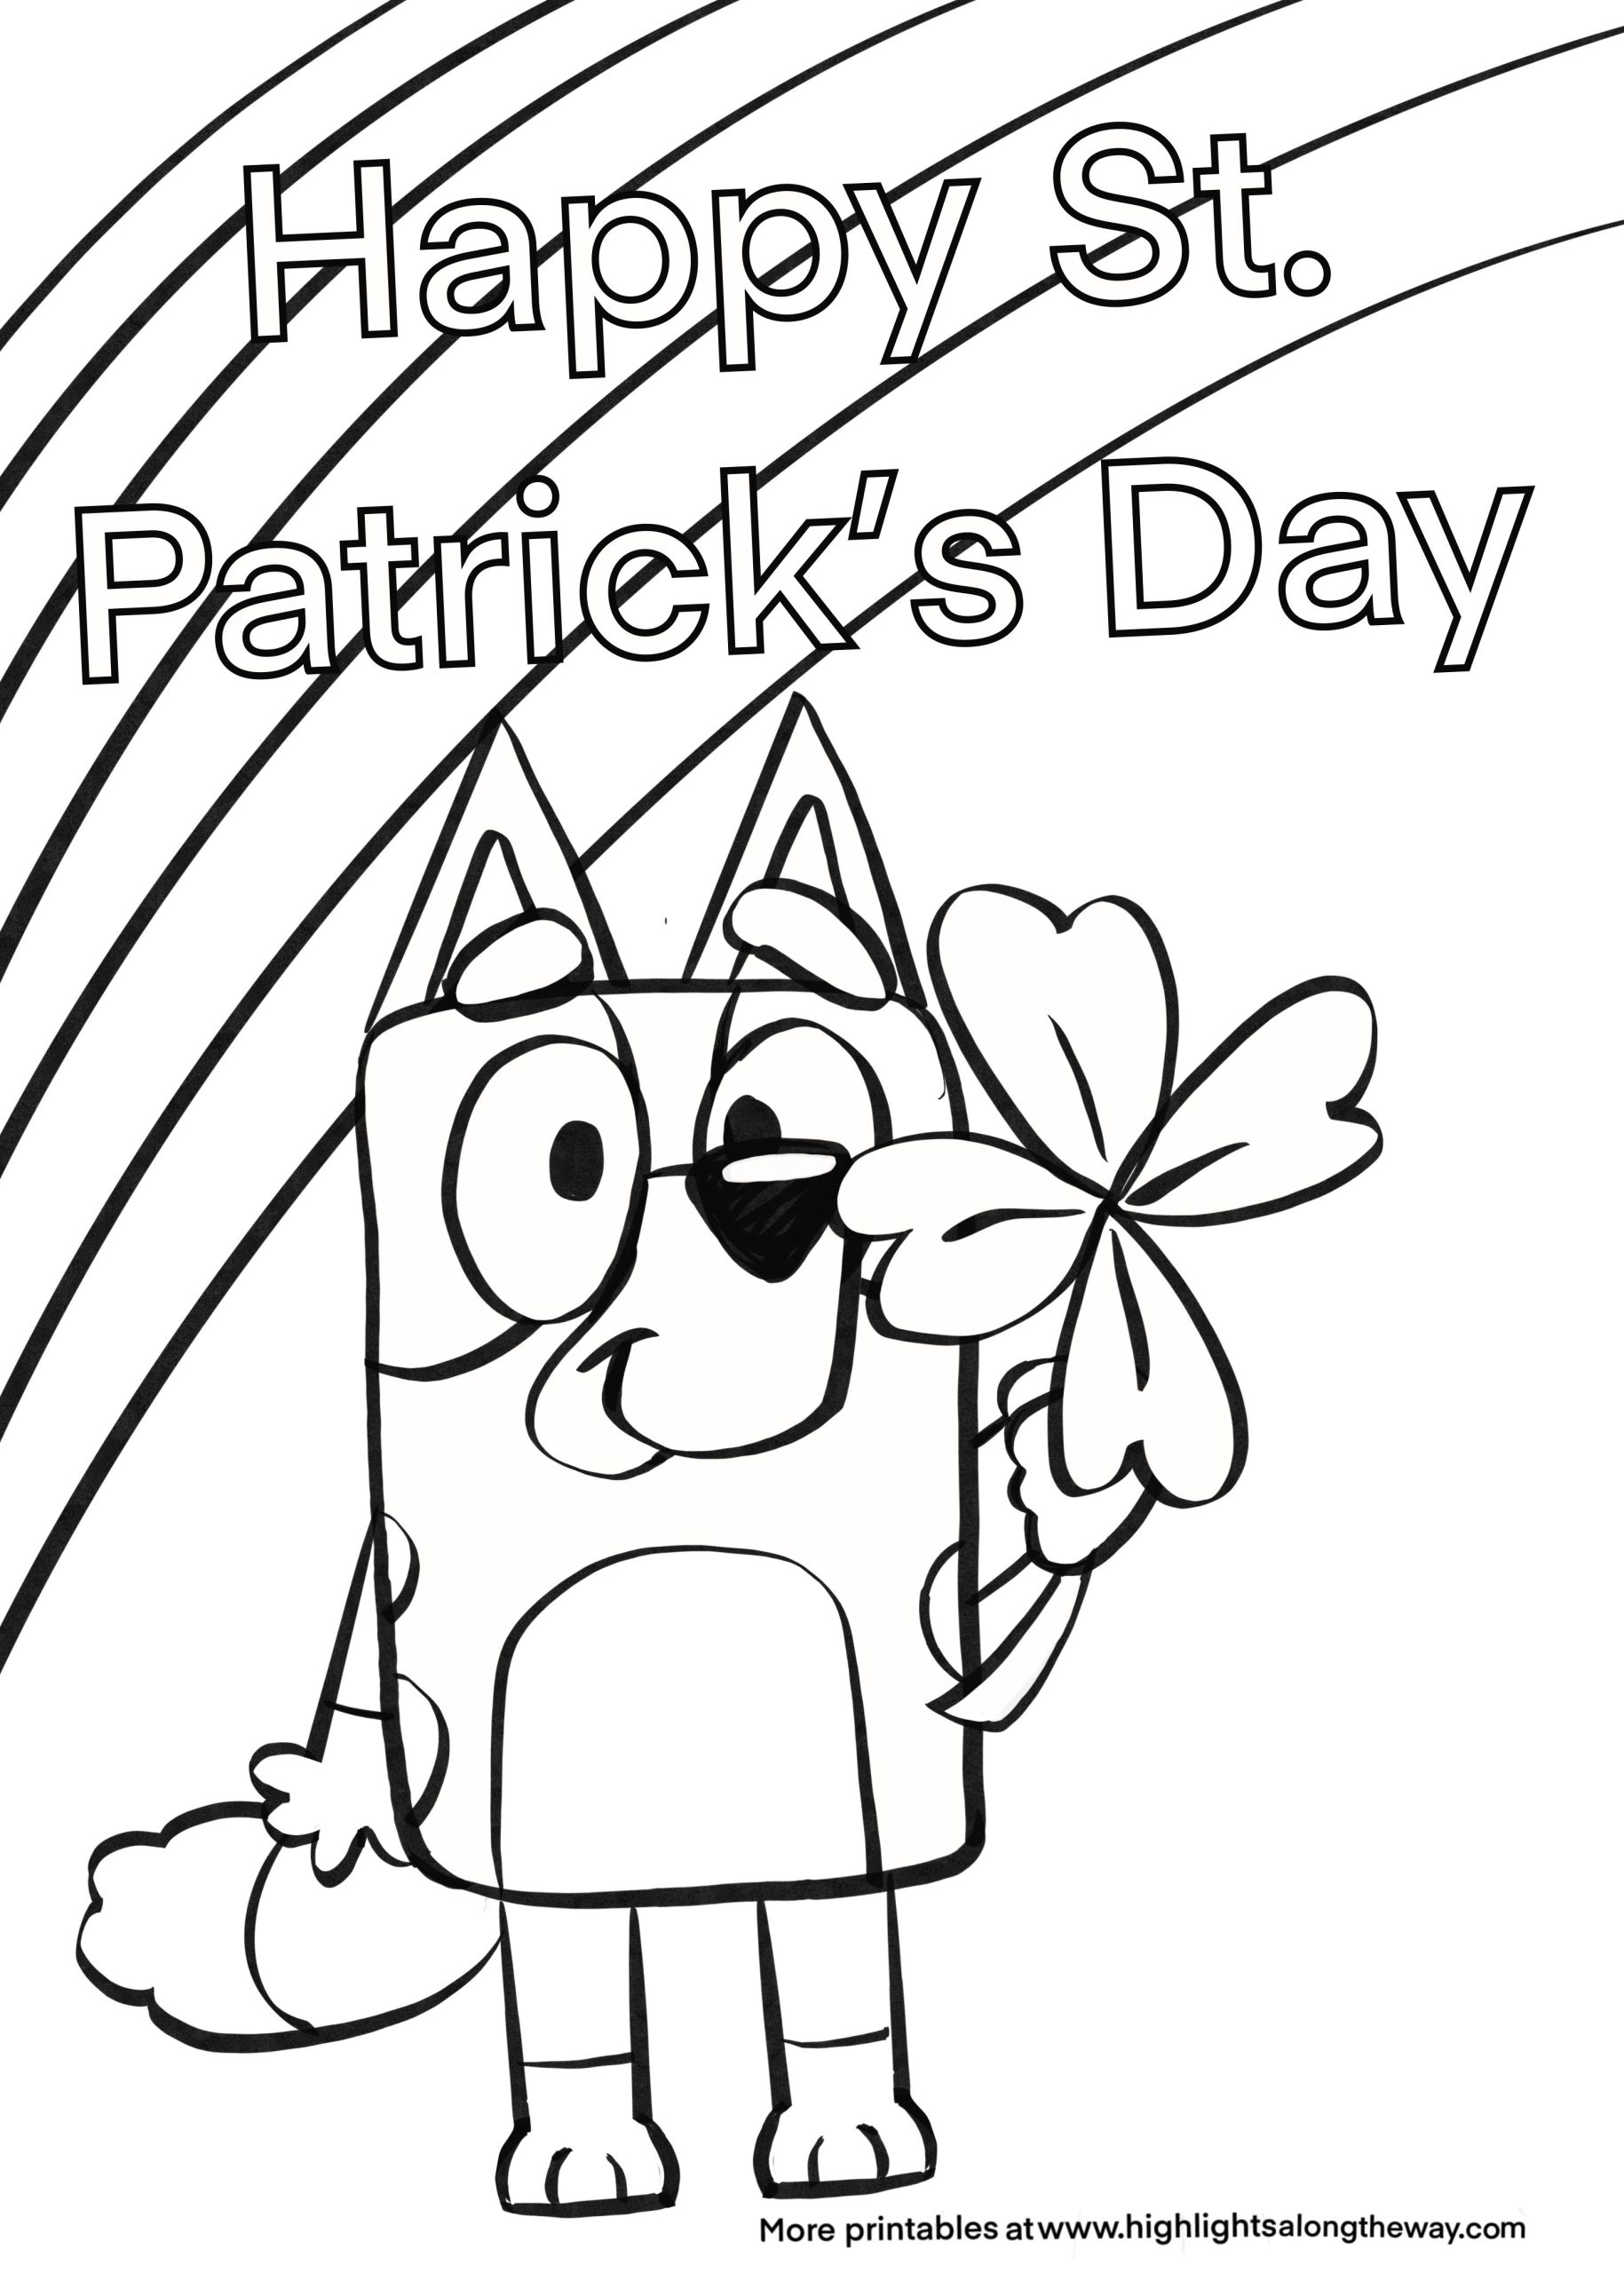 Bluey st patricks day coloring page